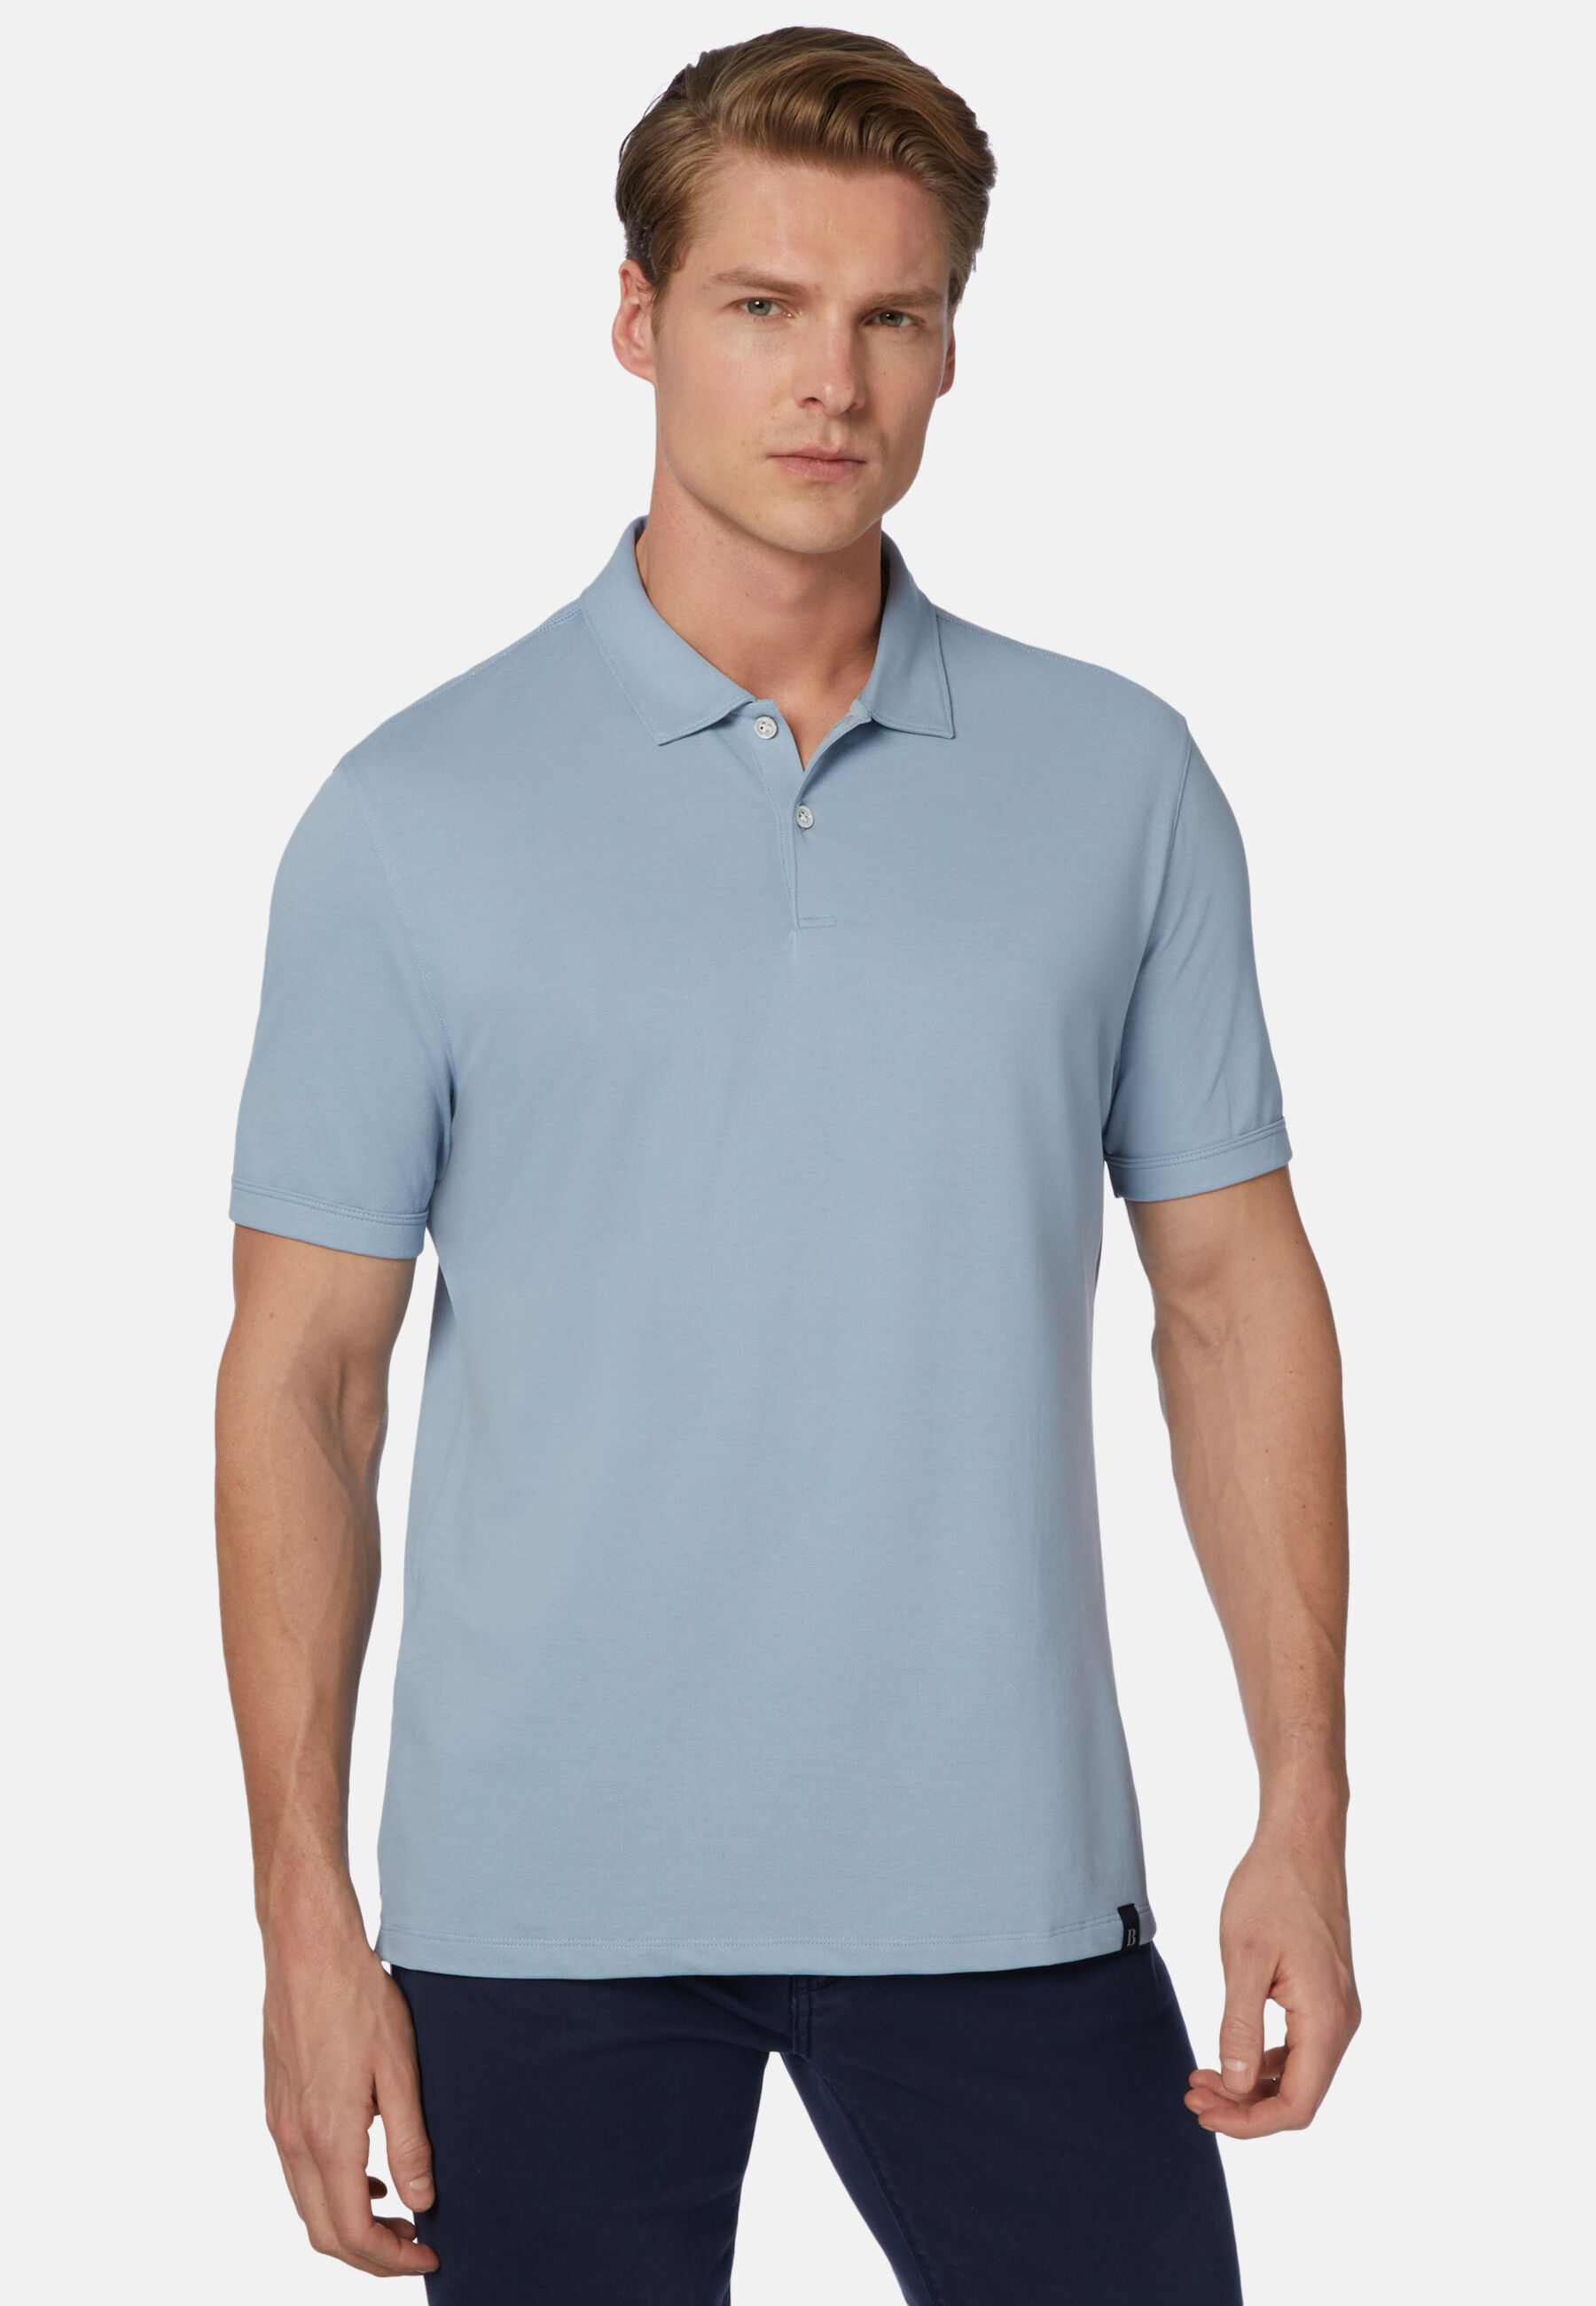 Spring Polo Shirt in Sustainable High-Performance Pique